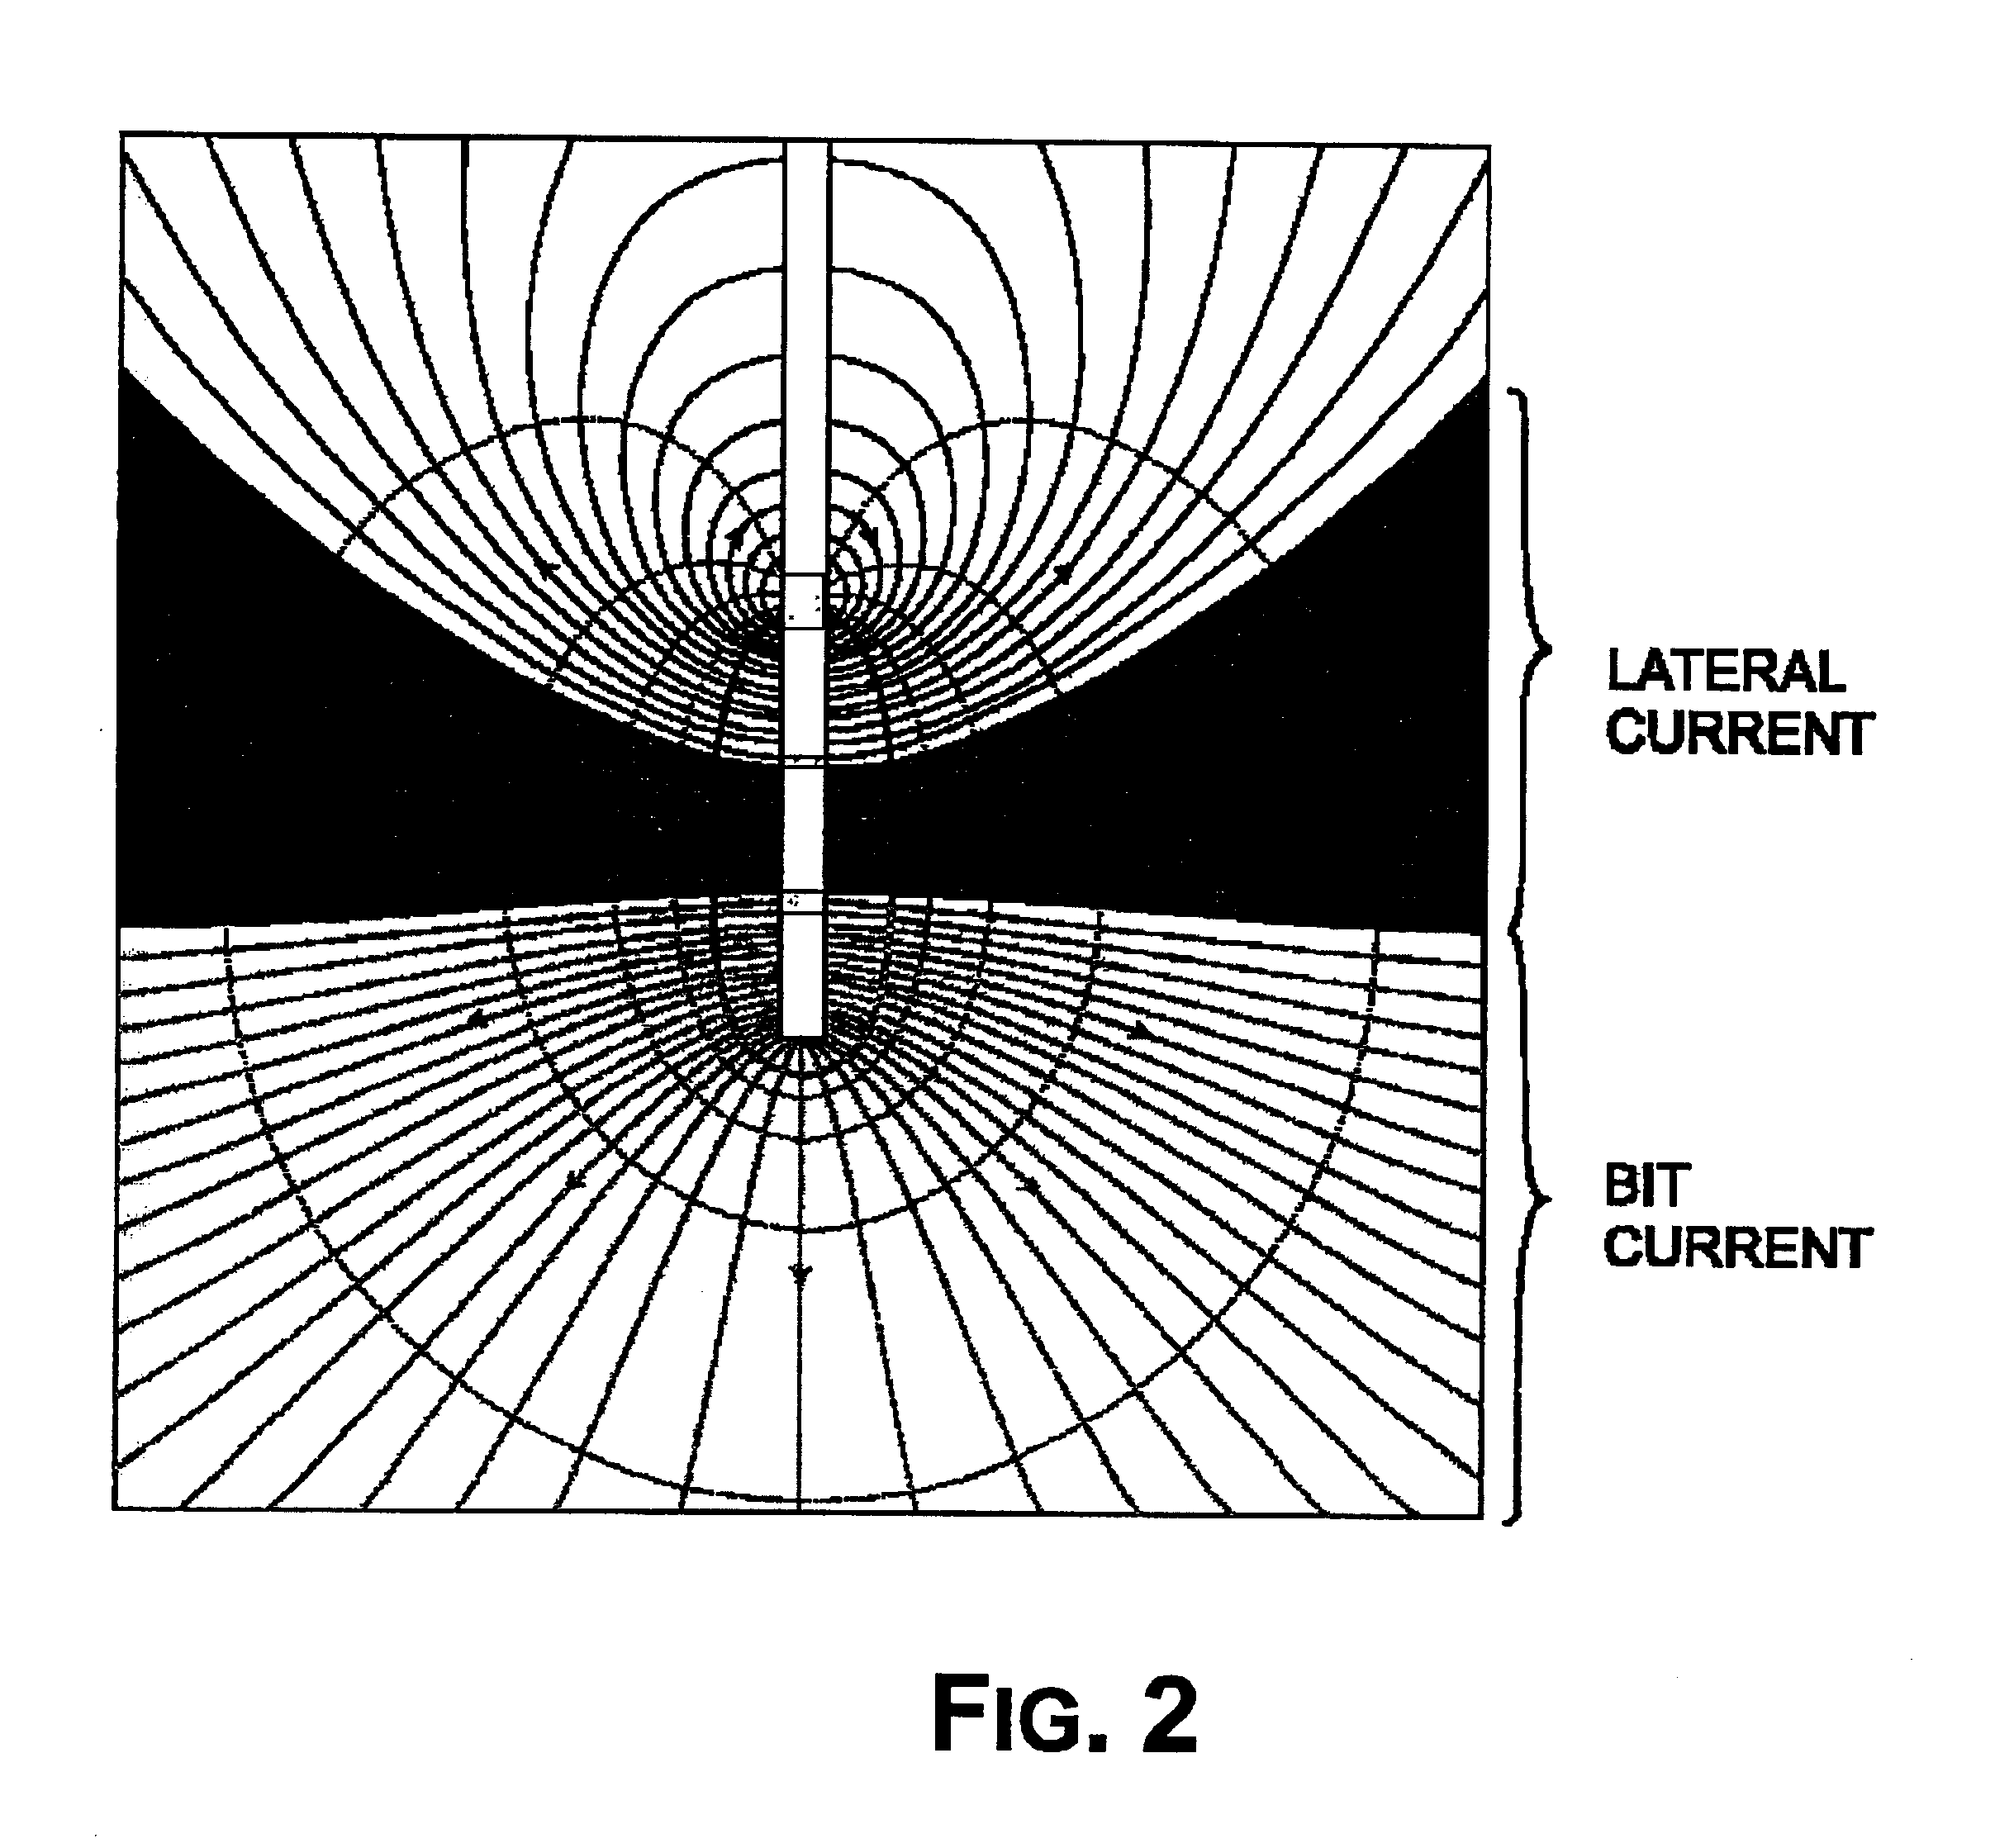 Method and apparatus measuring electrical anisotropy in formations surrounding a wellbore